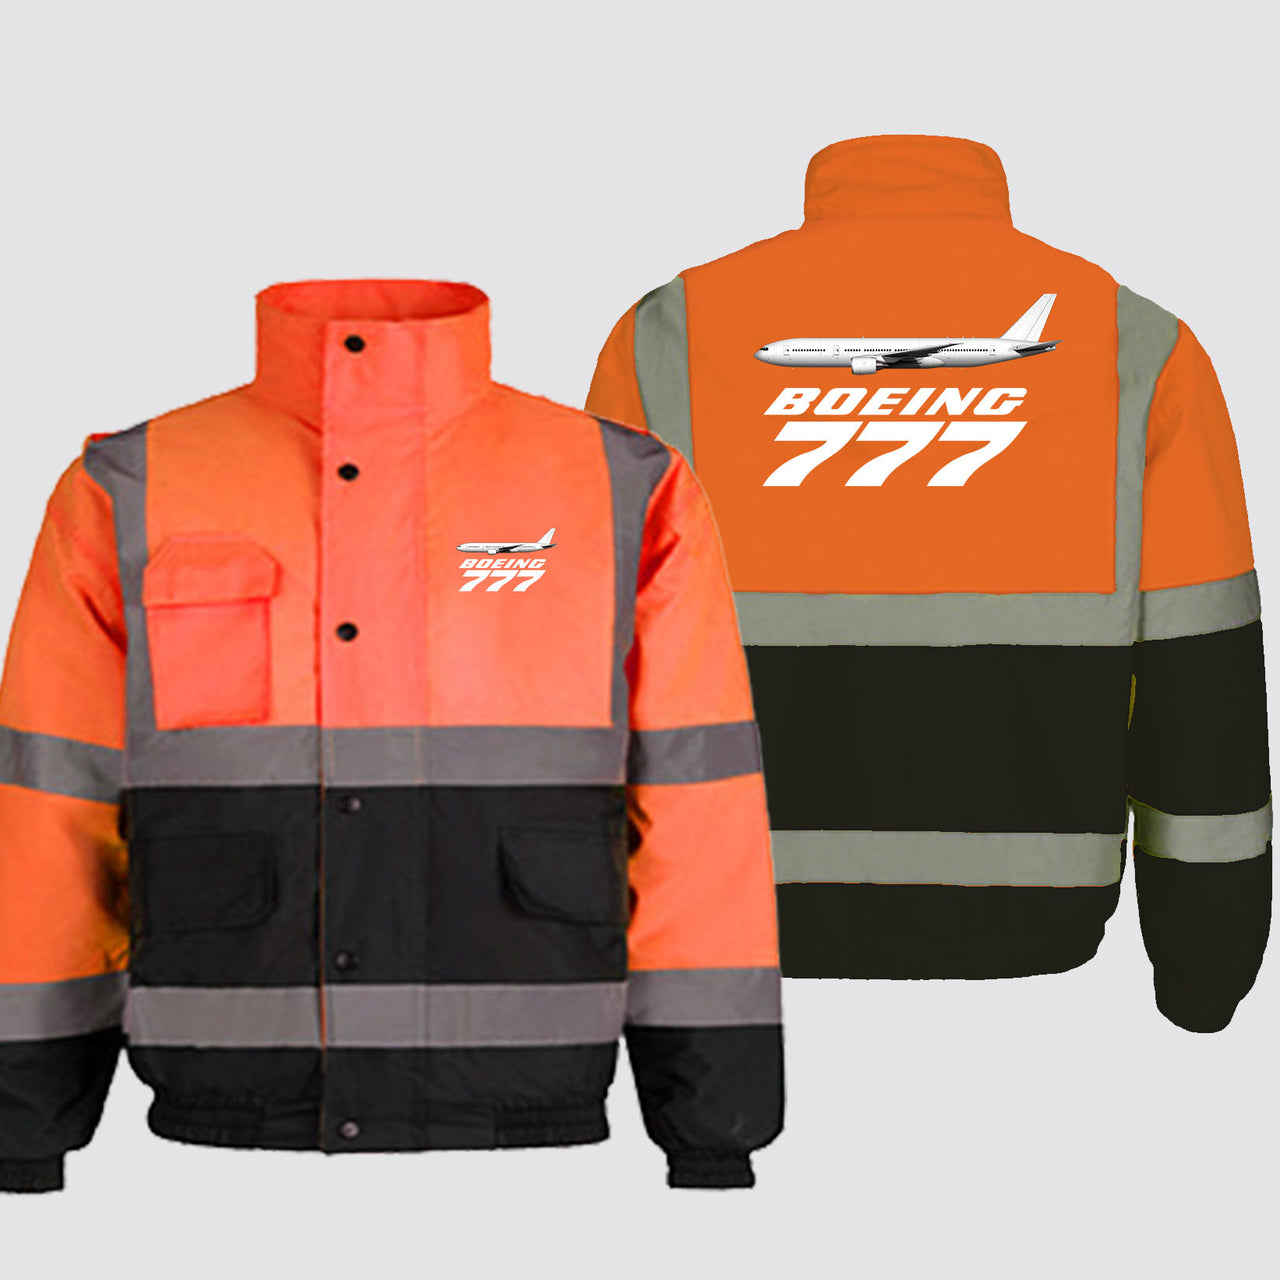 The Boeing 777 Designed Reflective Winter Jackets